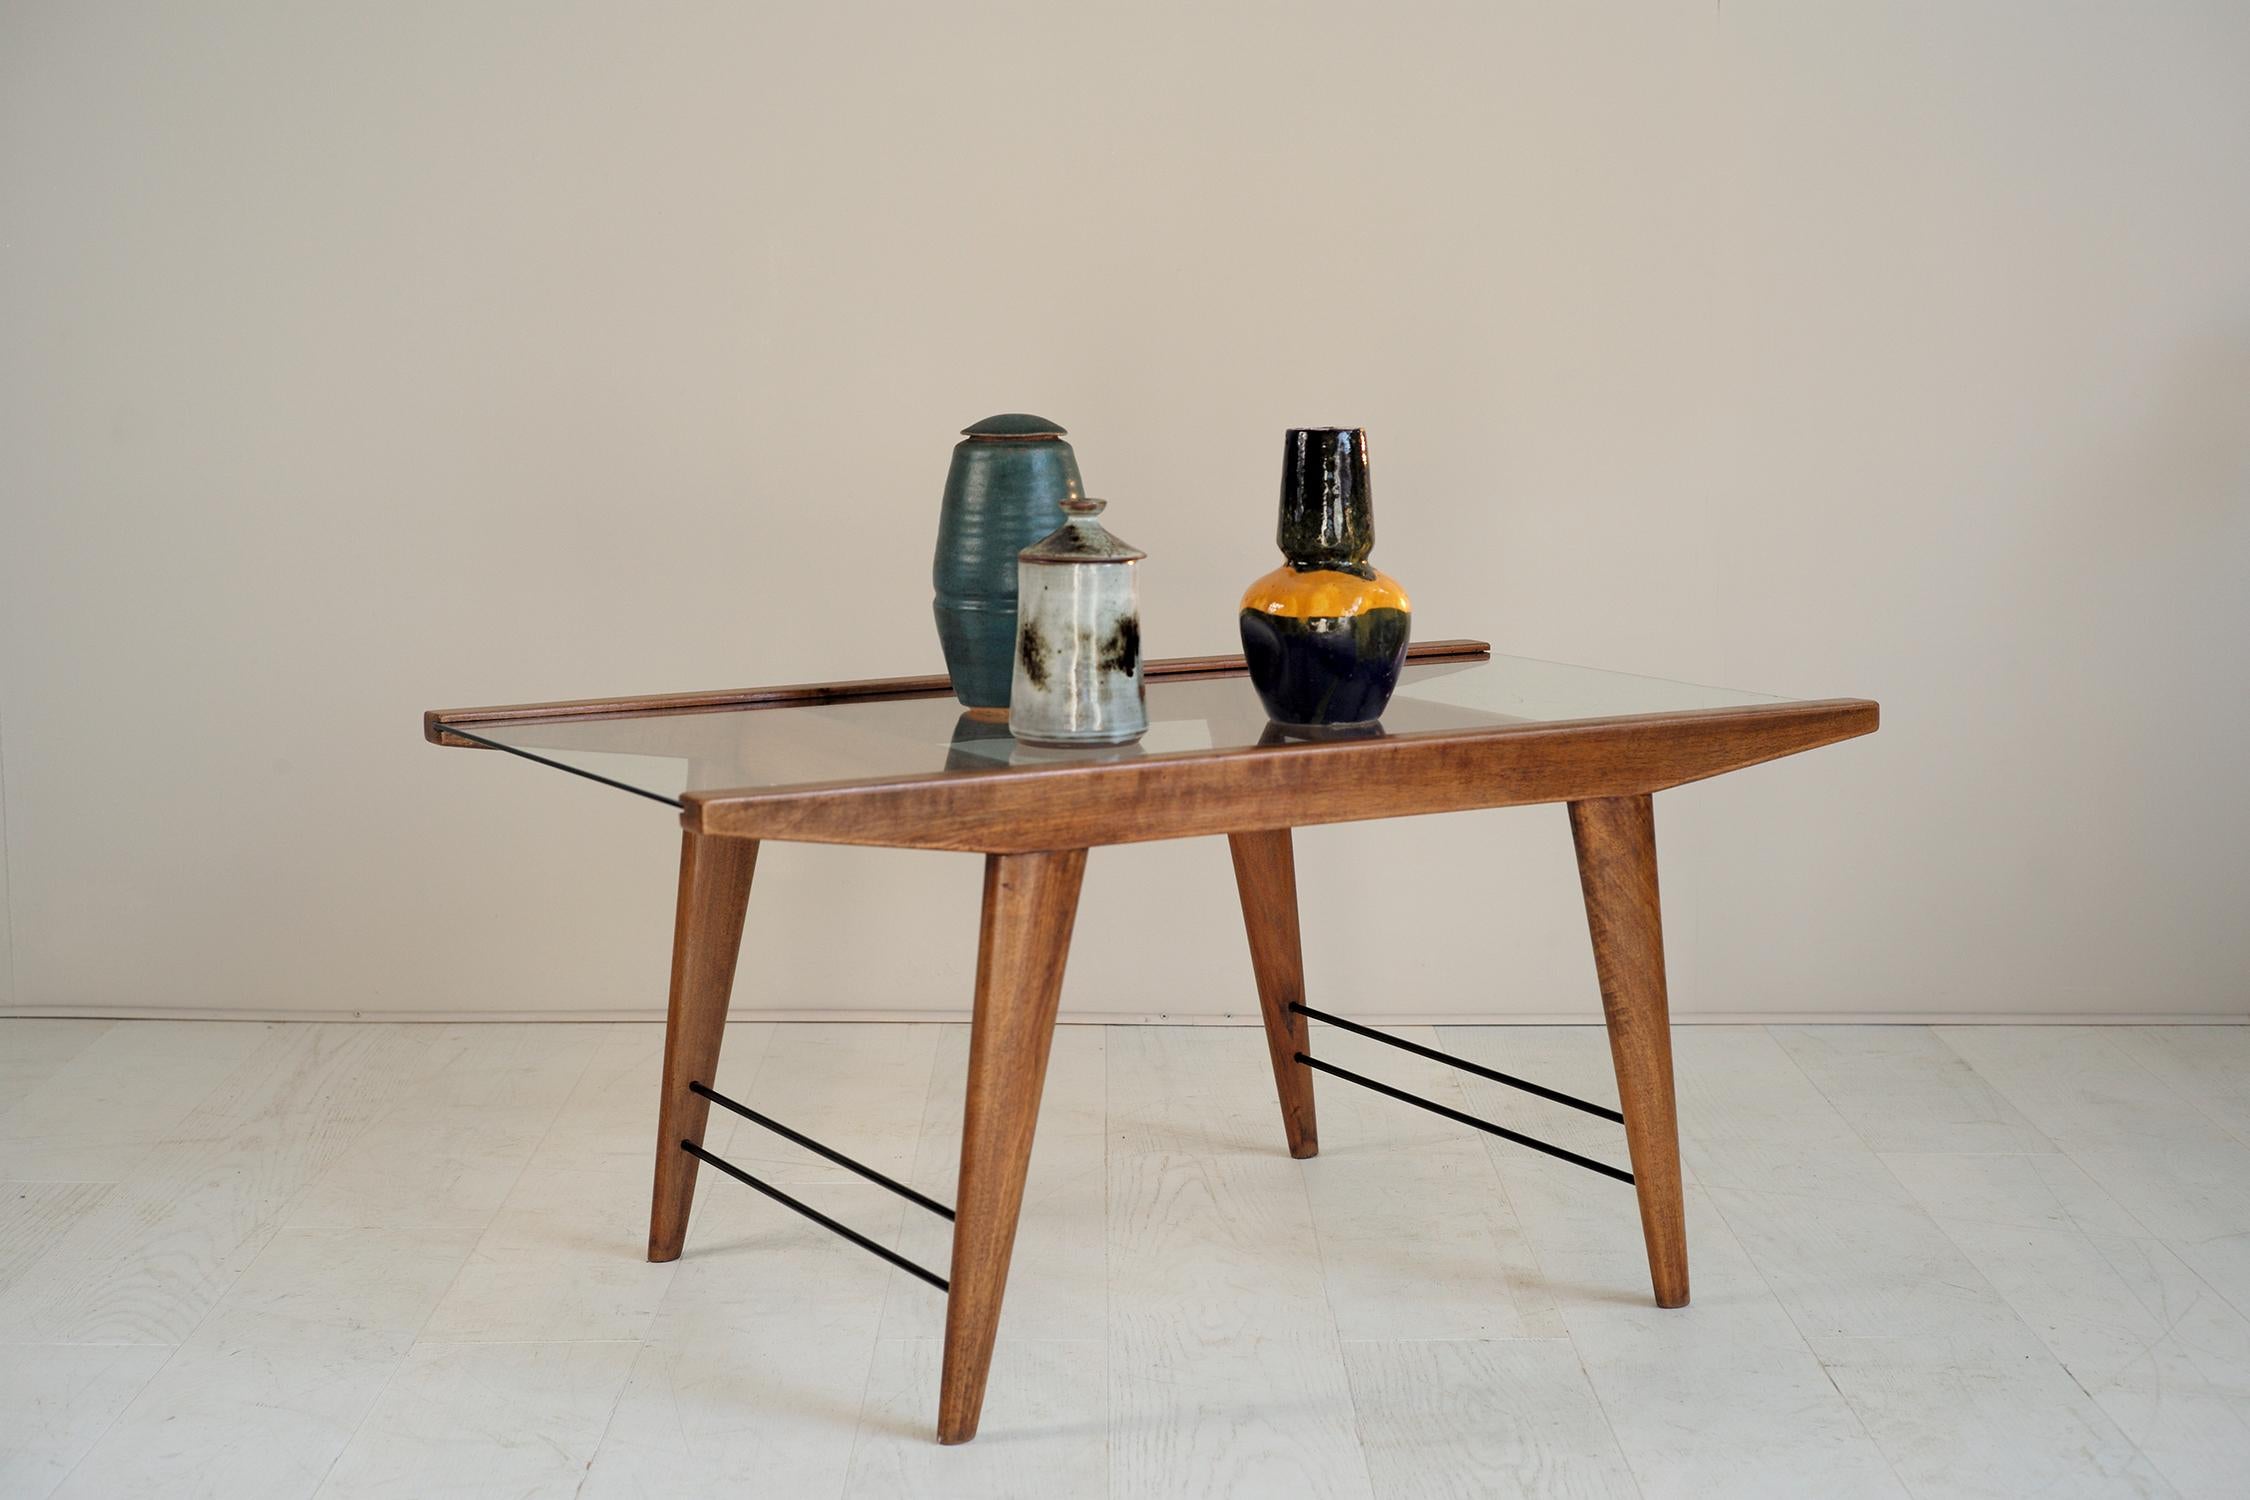 Mid-20th Century Modernist Coffee Table in Mahogany, Brass and Glass, France, 1950 For Sale